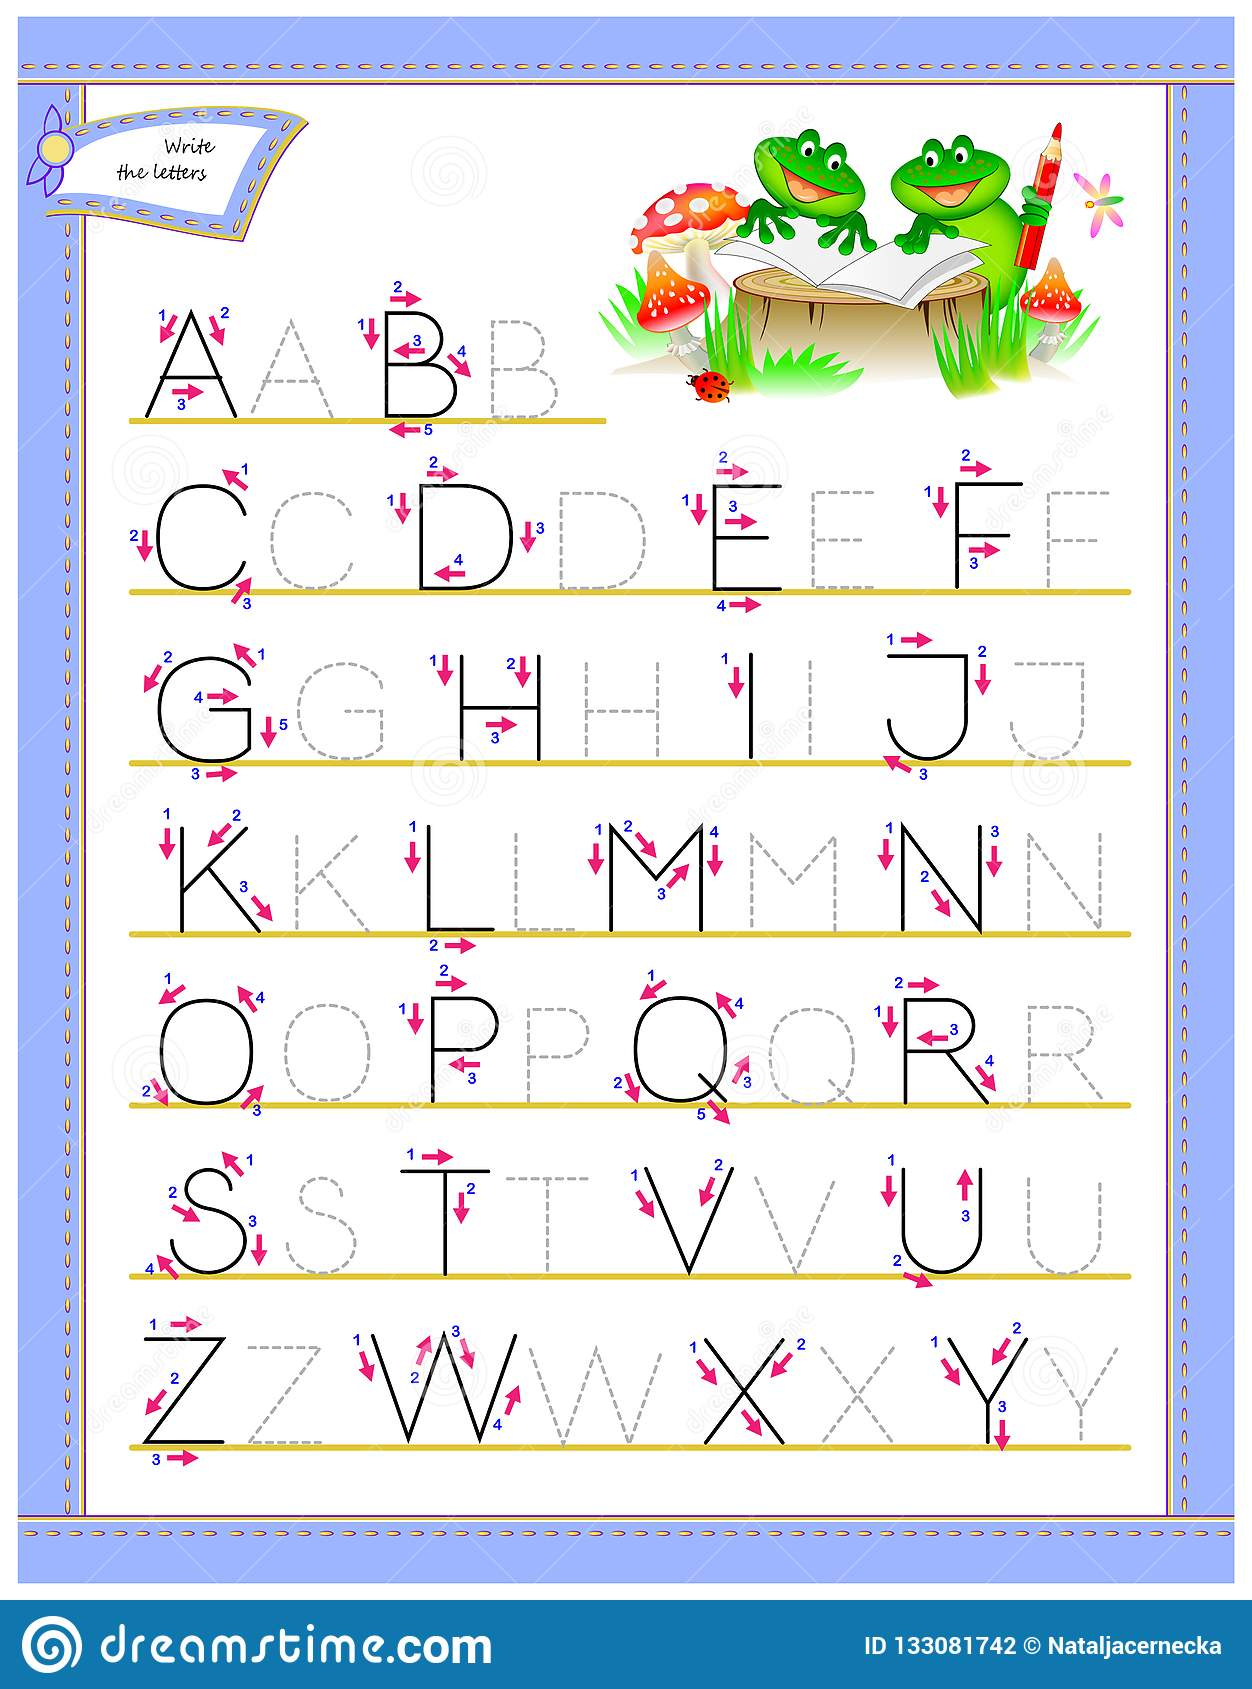 Tracing Abc Letters For Study English Alphabet. Worksheet regarding Alphabet Worksheets Tracing